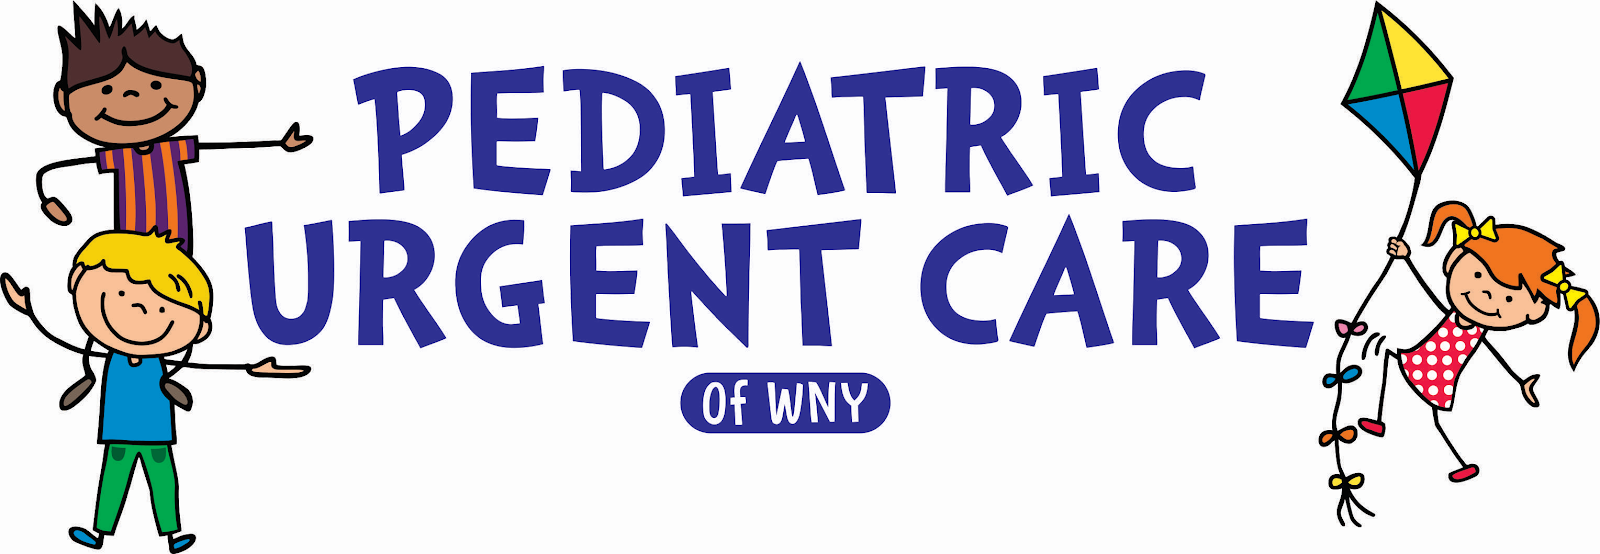 Pediatric and Adolescent Urgent Care of WNY - Orchard Park Logo